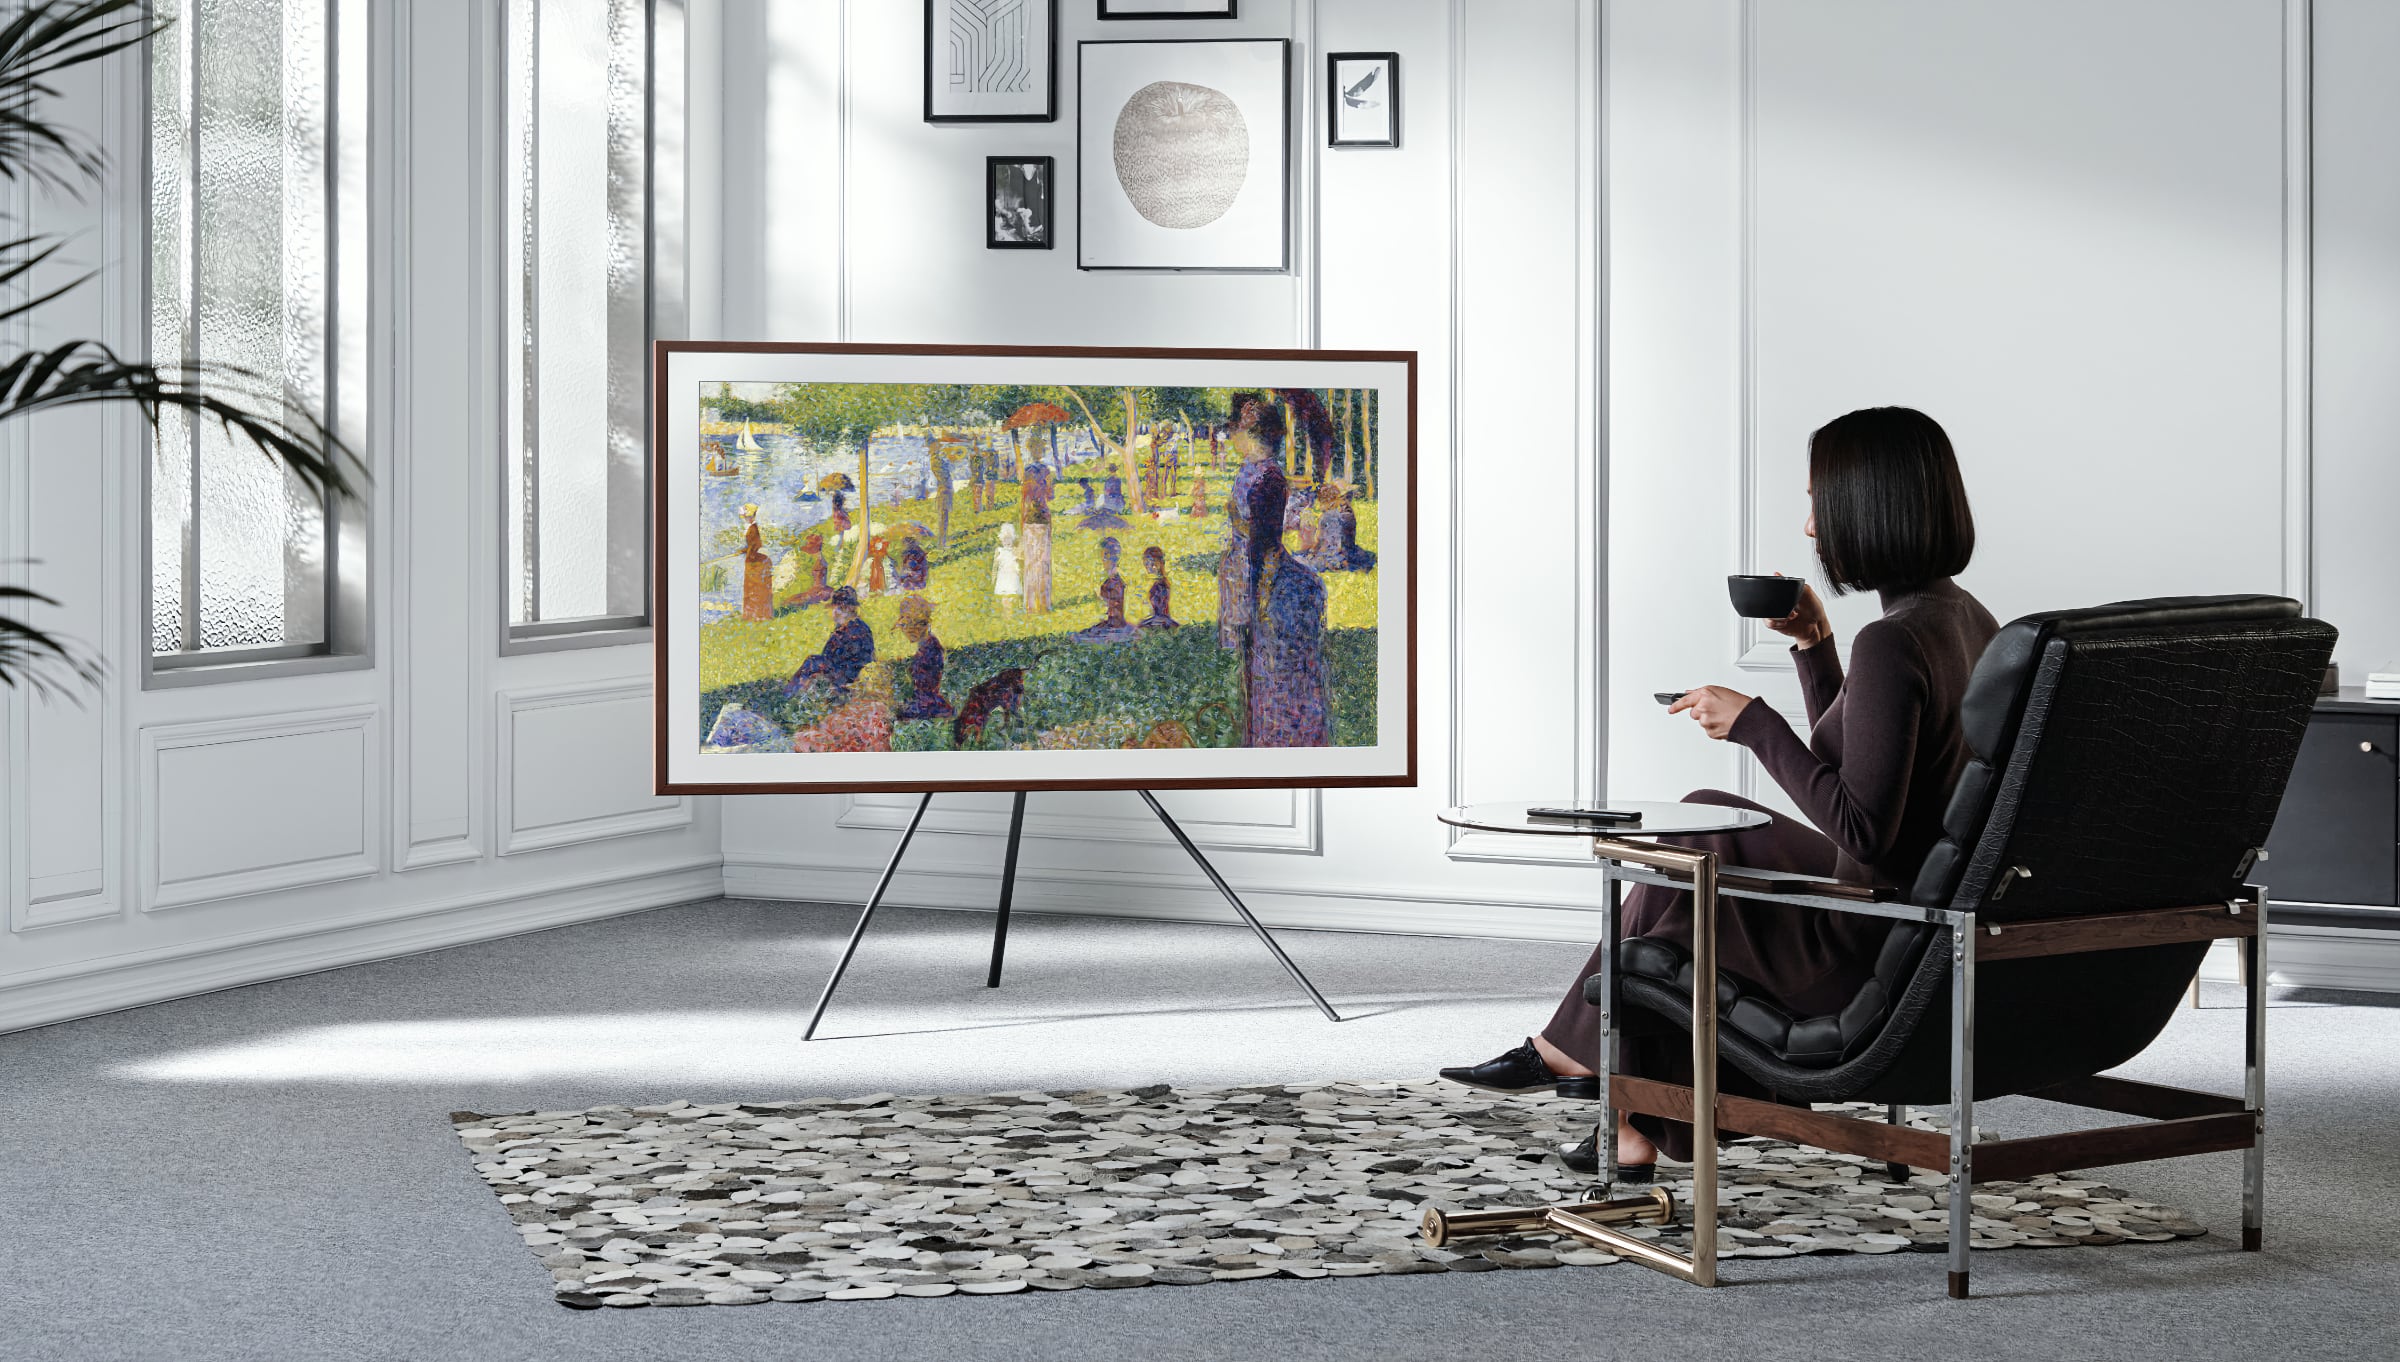 Samsung: Total sales of 'The Frame' to exceed 2 million by year's